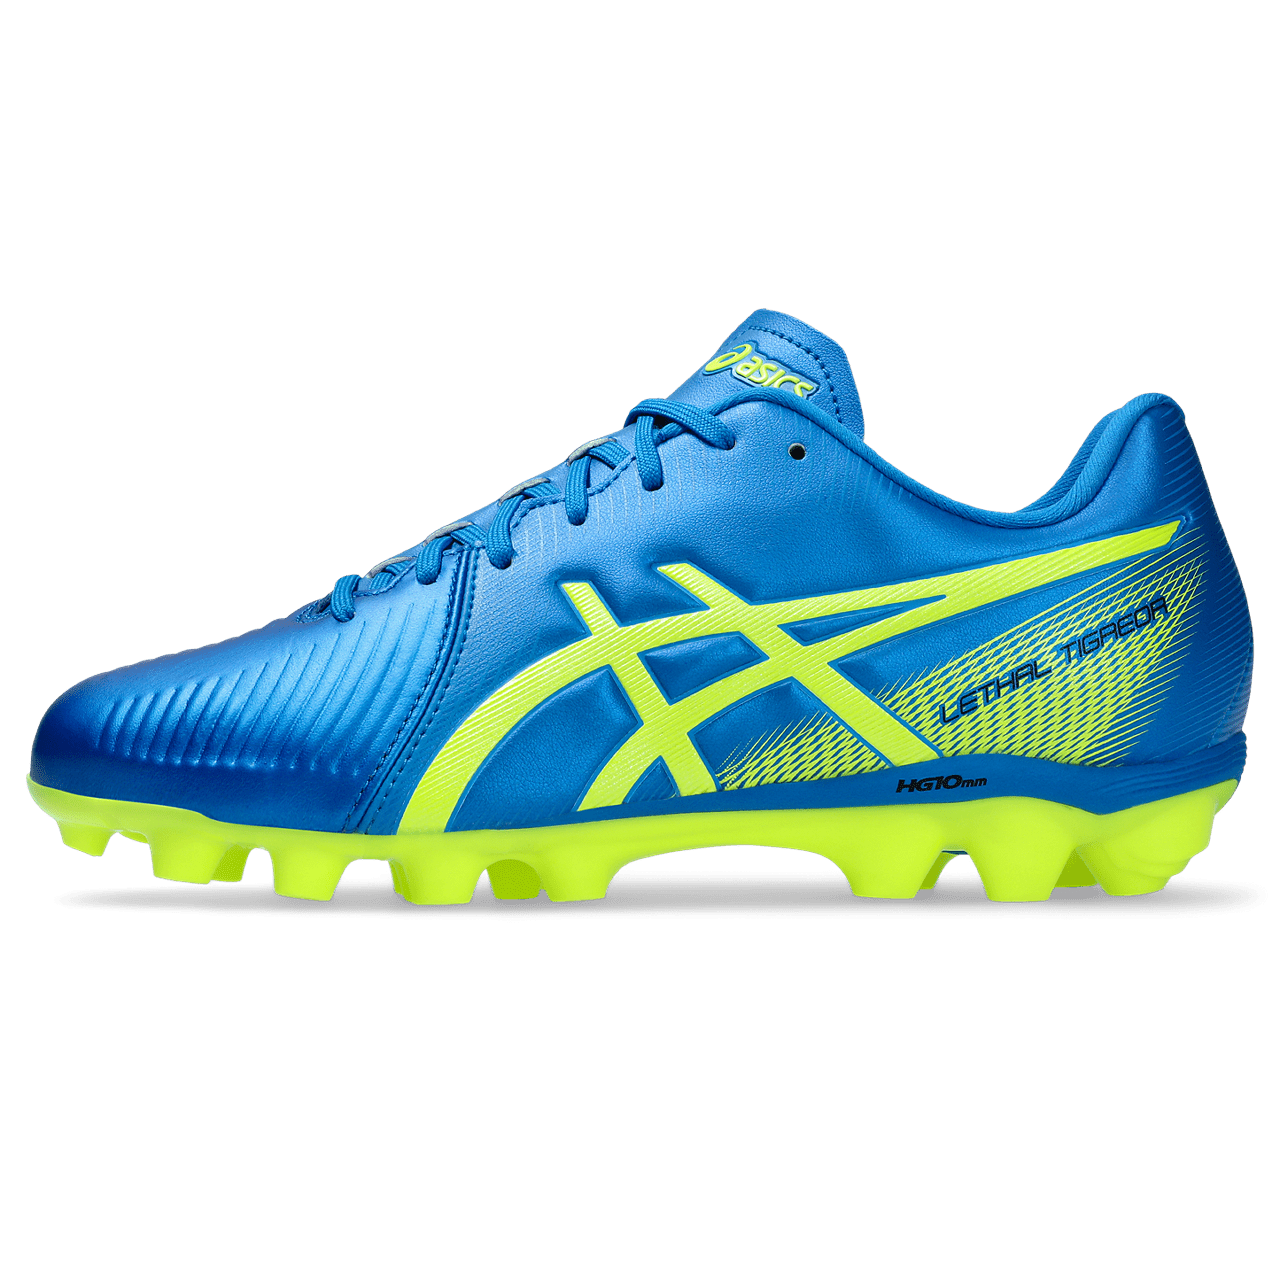 Asics Lethal Tigreor IT 3 FG Junior Football Boot BLUE/SAFTETY YELLOW